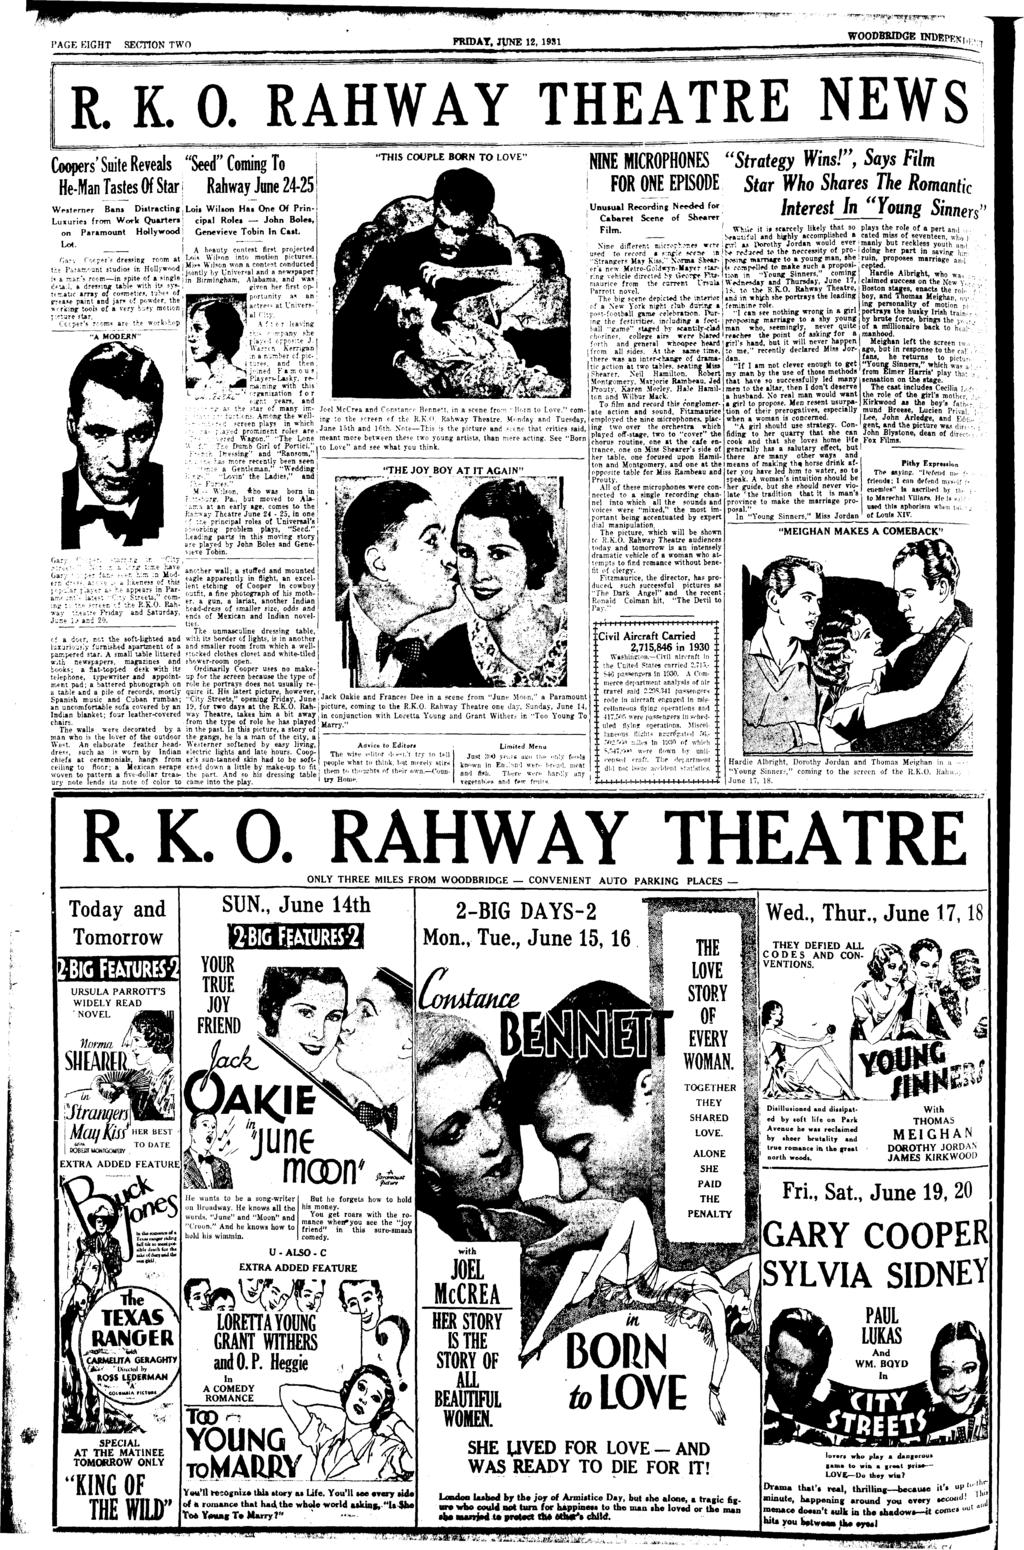 PAGE EGHT SECTON TWO FWDAT, WOOPBMDGE NDBPRKT R. K.. RAHWAY THEATRE NEWS Coopers' Sute Reveals He-Man Tastes Of Star Gary Cooper'? dressng room at the 'ararr.r-unt studos n Hollywood :«a nr.